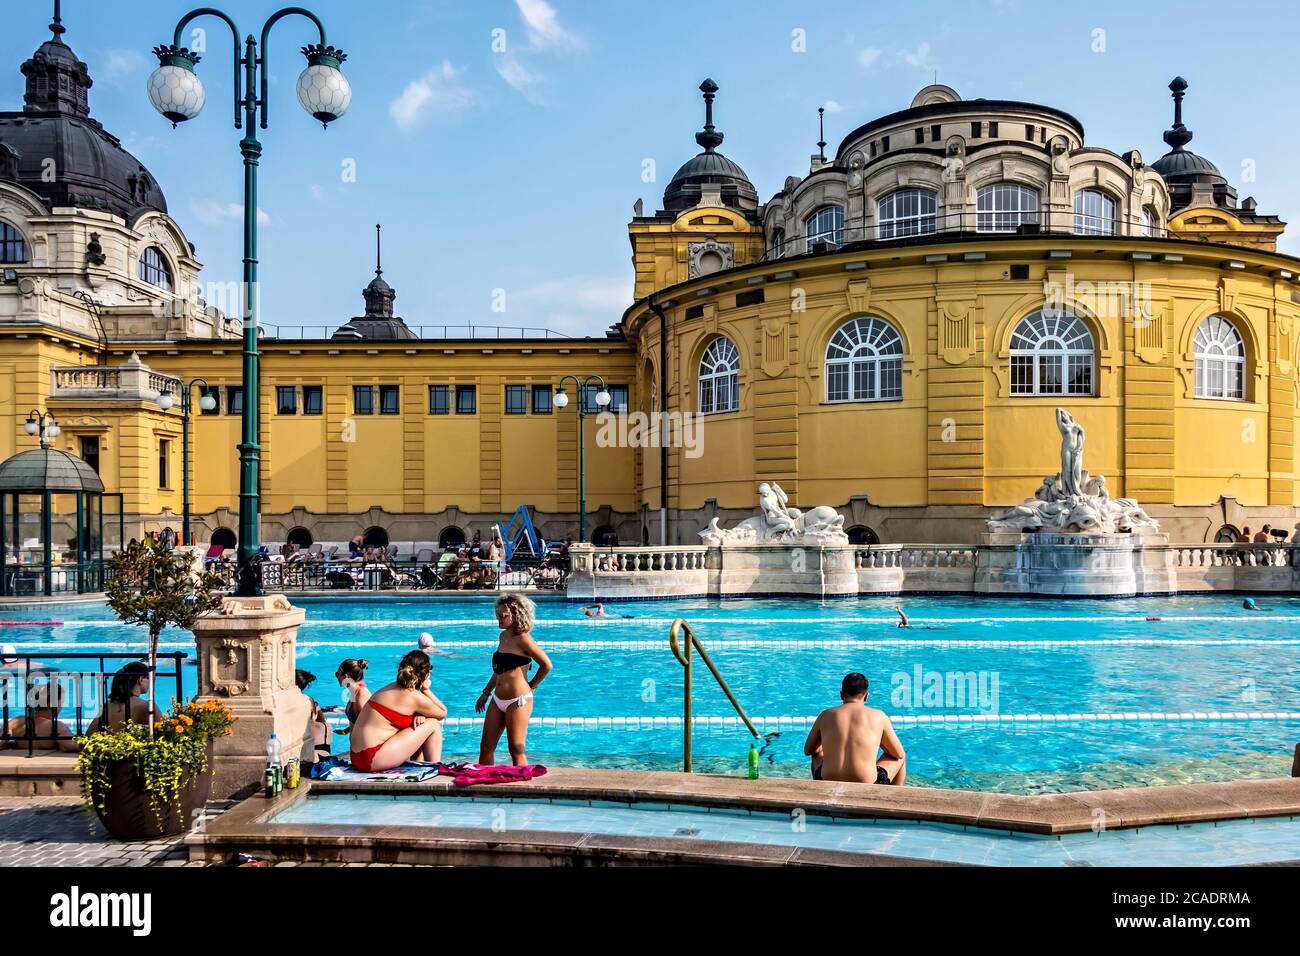 BUDAPEST, HUNGARY - August 24, 2019: Water massage in a mineral thermal  pool. The Szechenyi thermal bath BUDAPEST, HUNGARY Stock Photo - Alamy